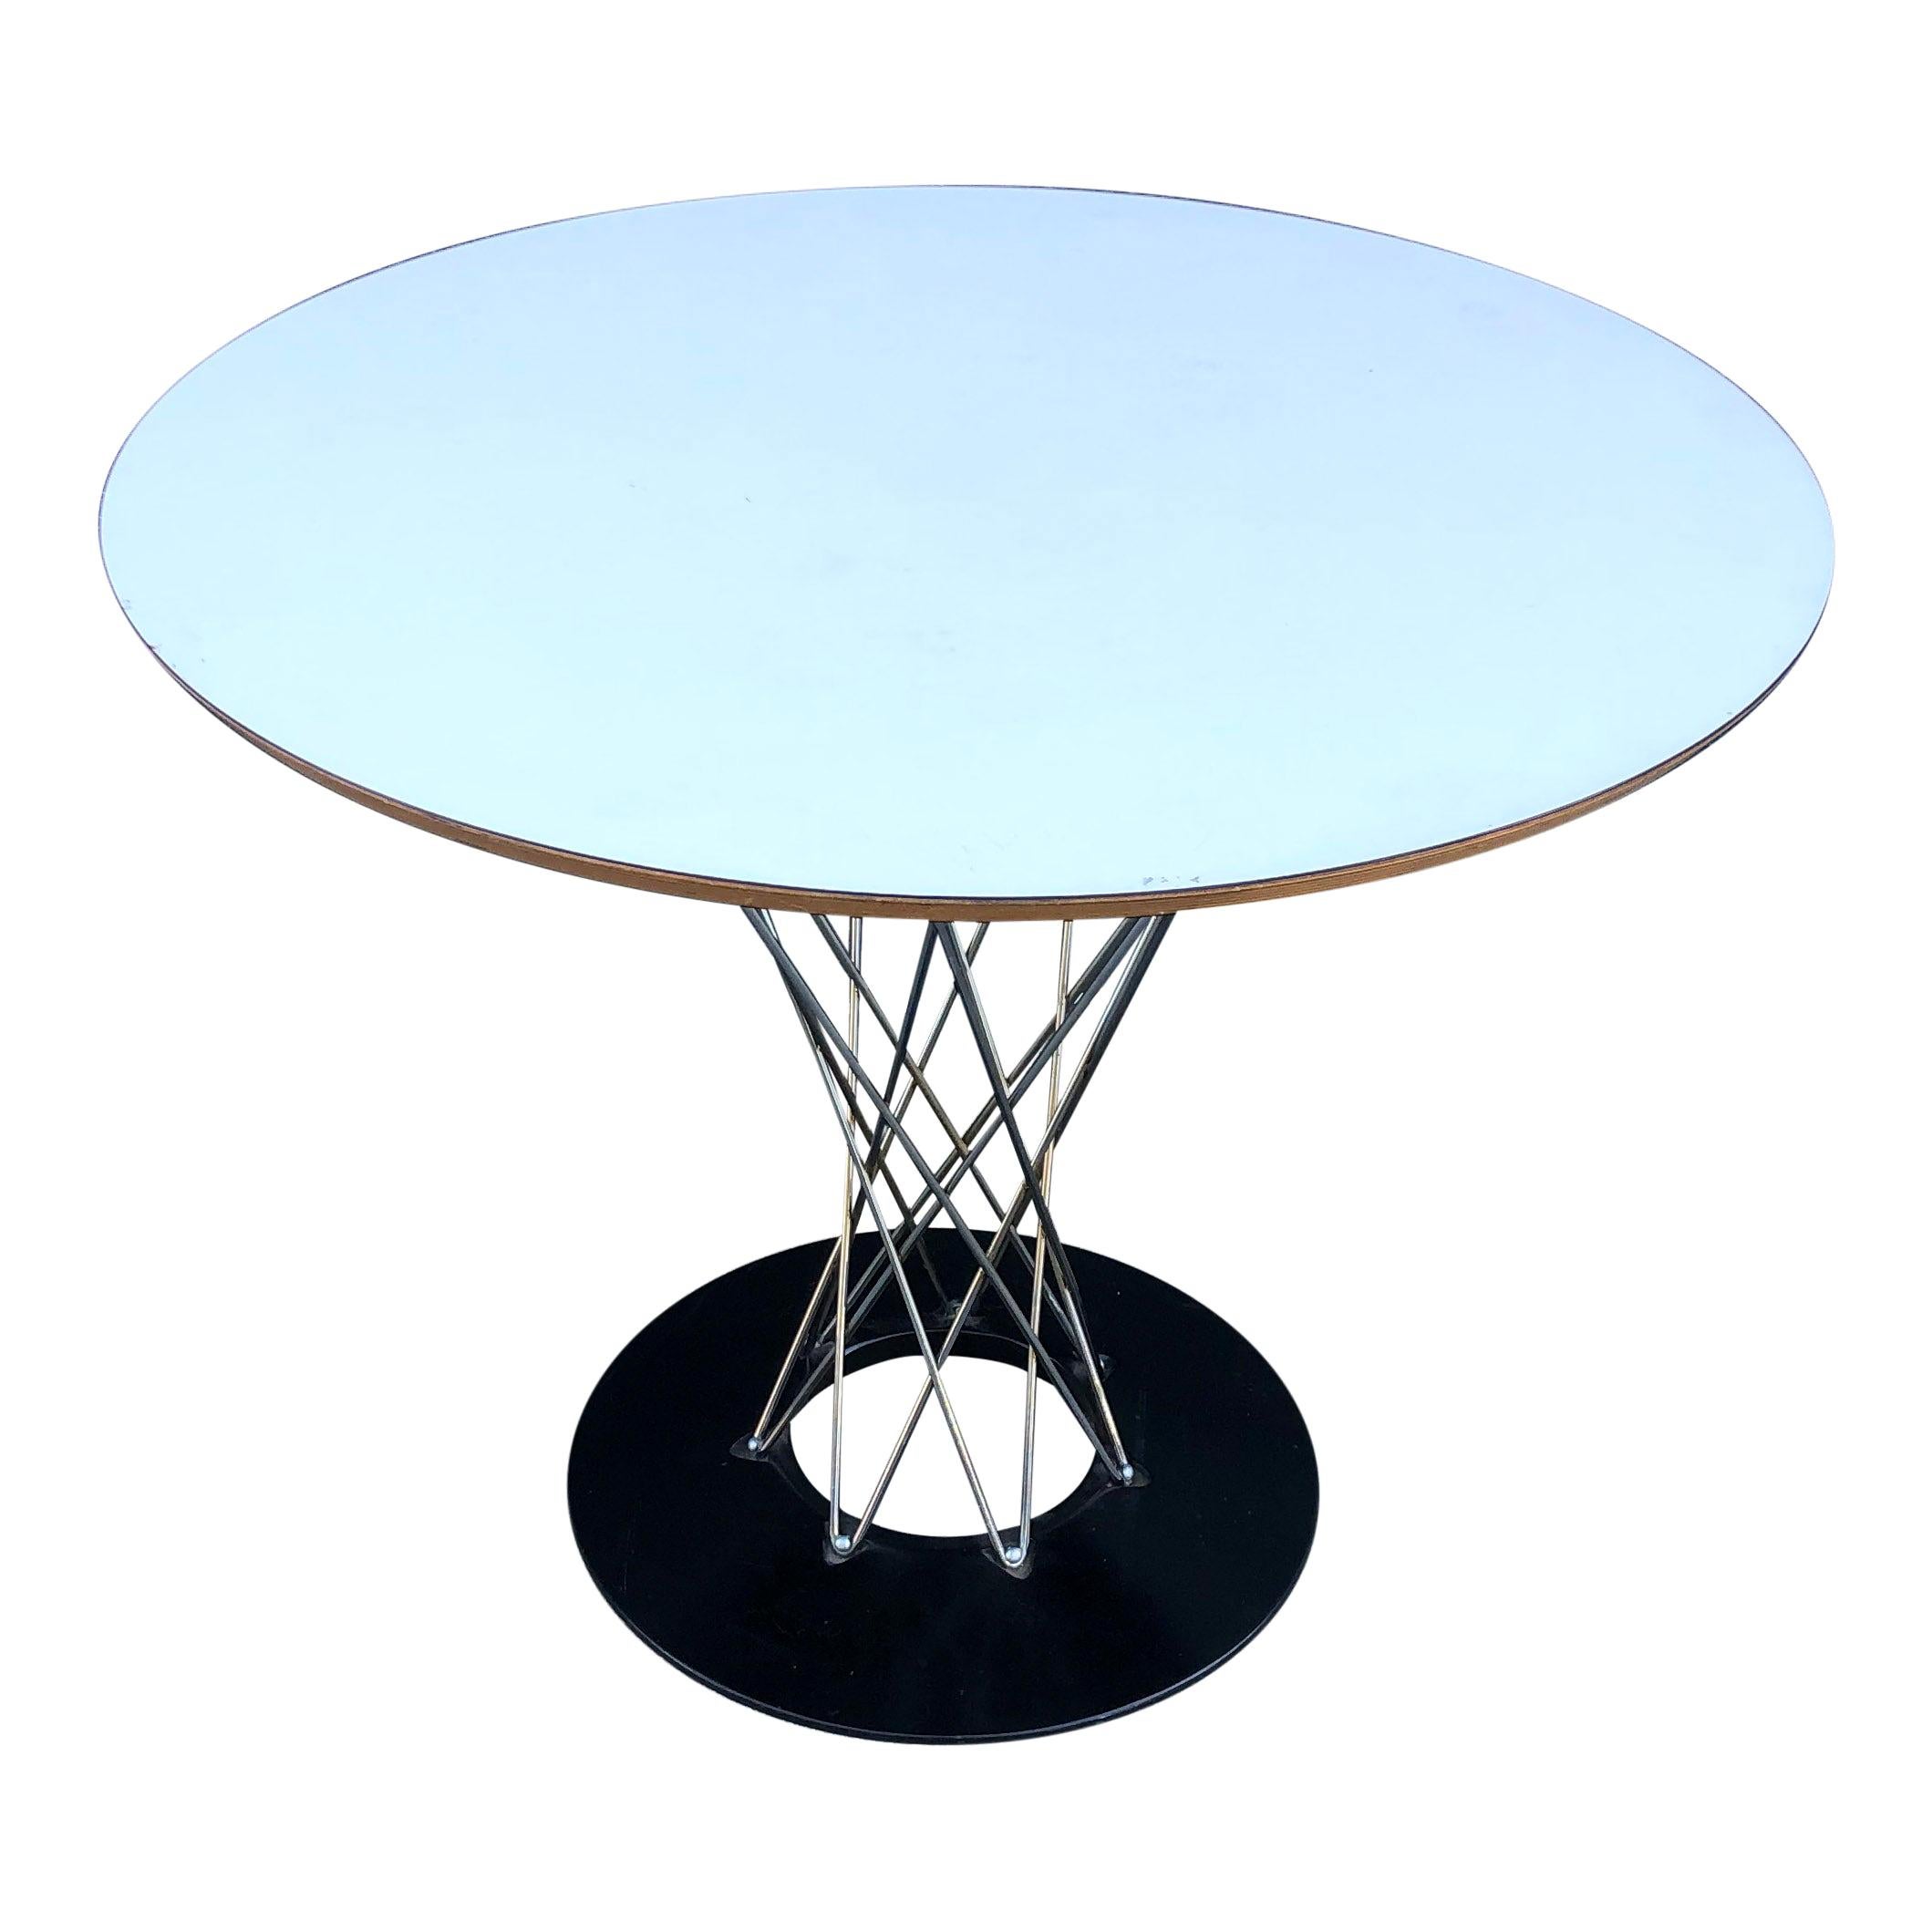 Midcentury Isamu Noguchi Cyclone Dining Table for Knoll